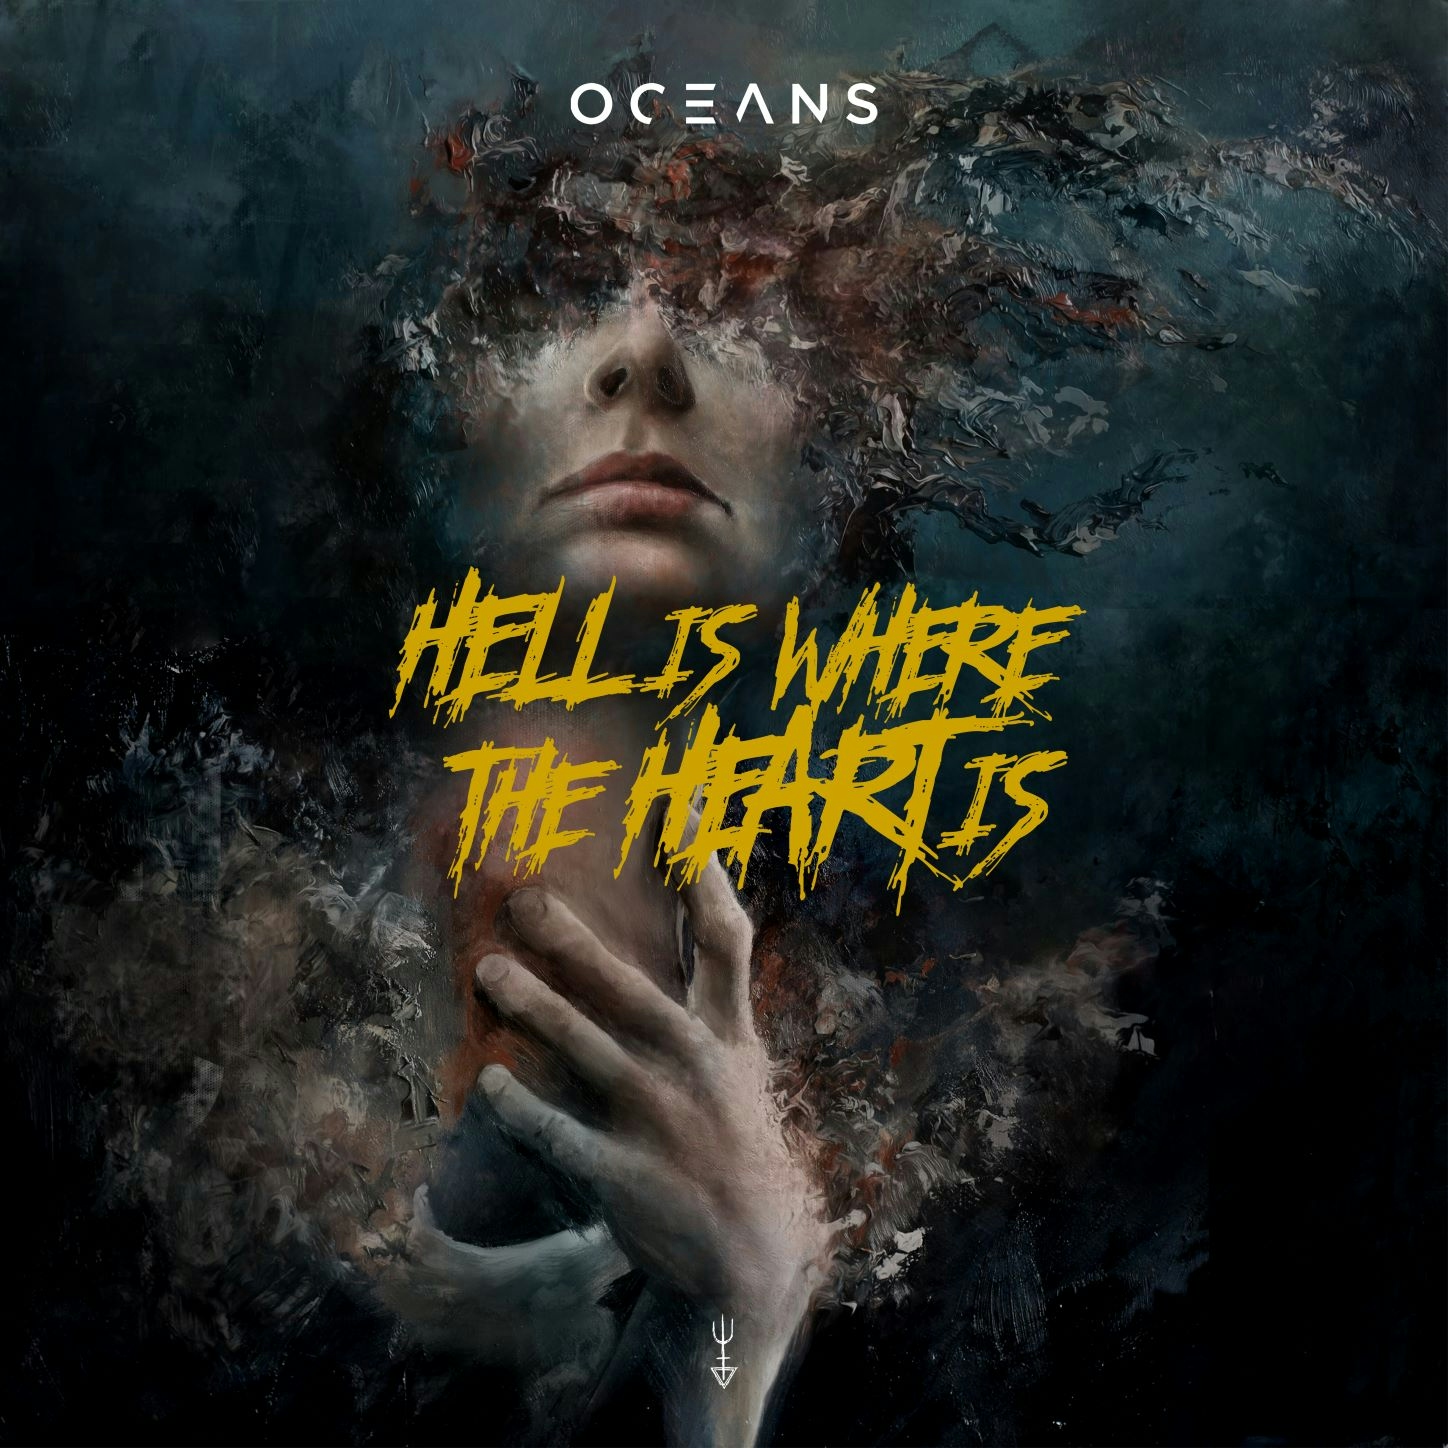 Album artwork for Album artwork for Hell Is Where the Heart Is by Oceans by Hell Is Where the Heart Is - Oceans